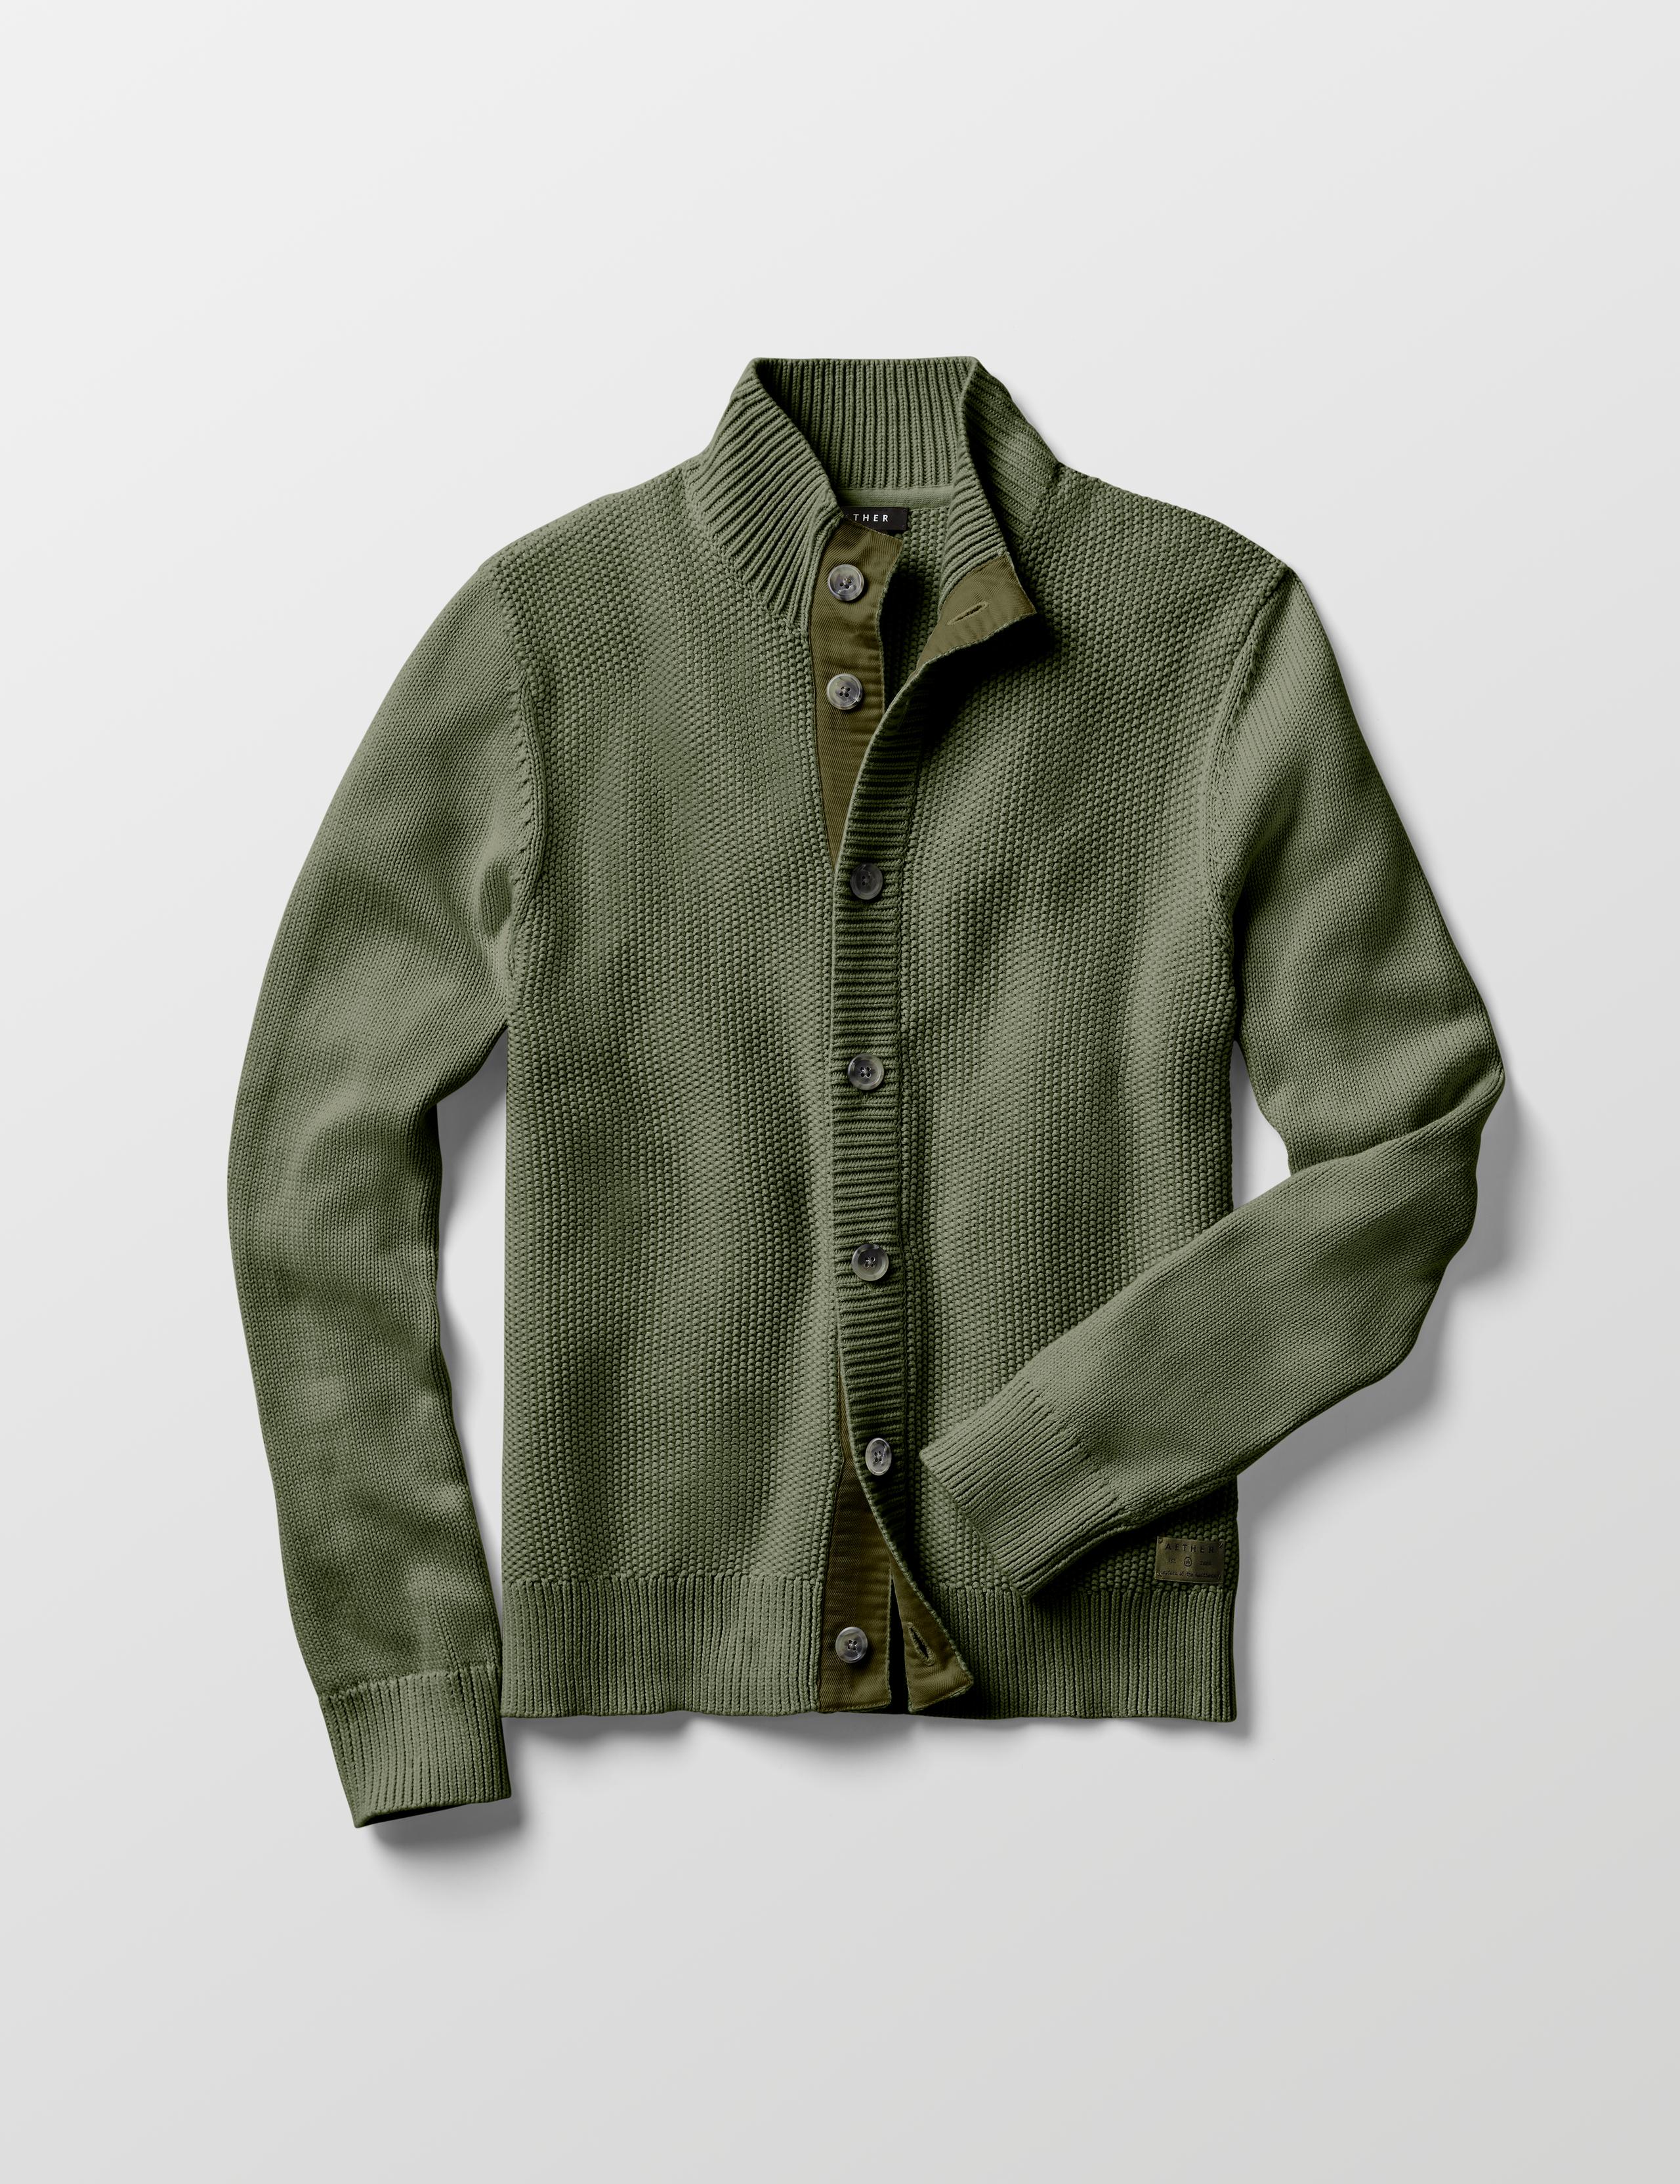 Studio laydown of Oliver Button-Up Sweater in Fern Green